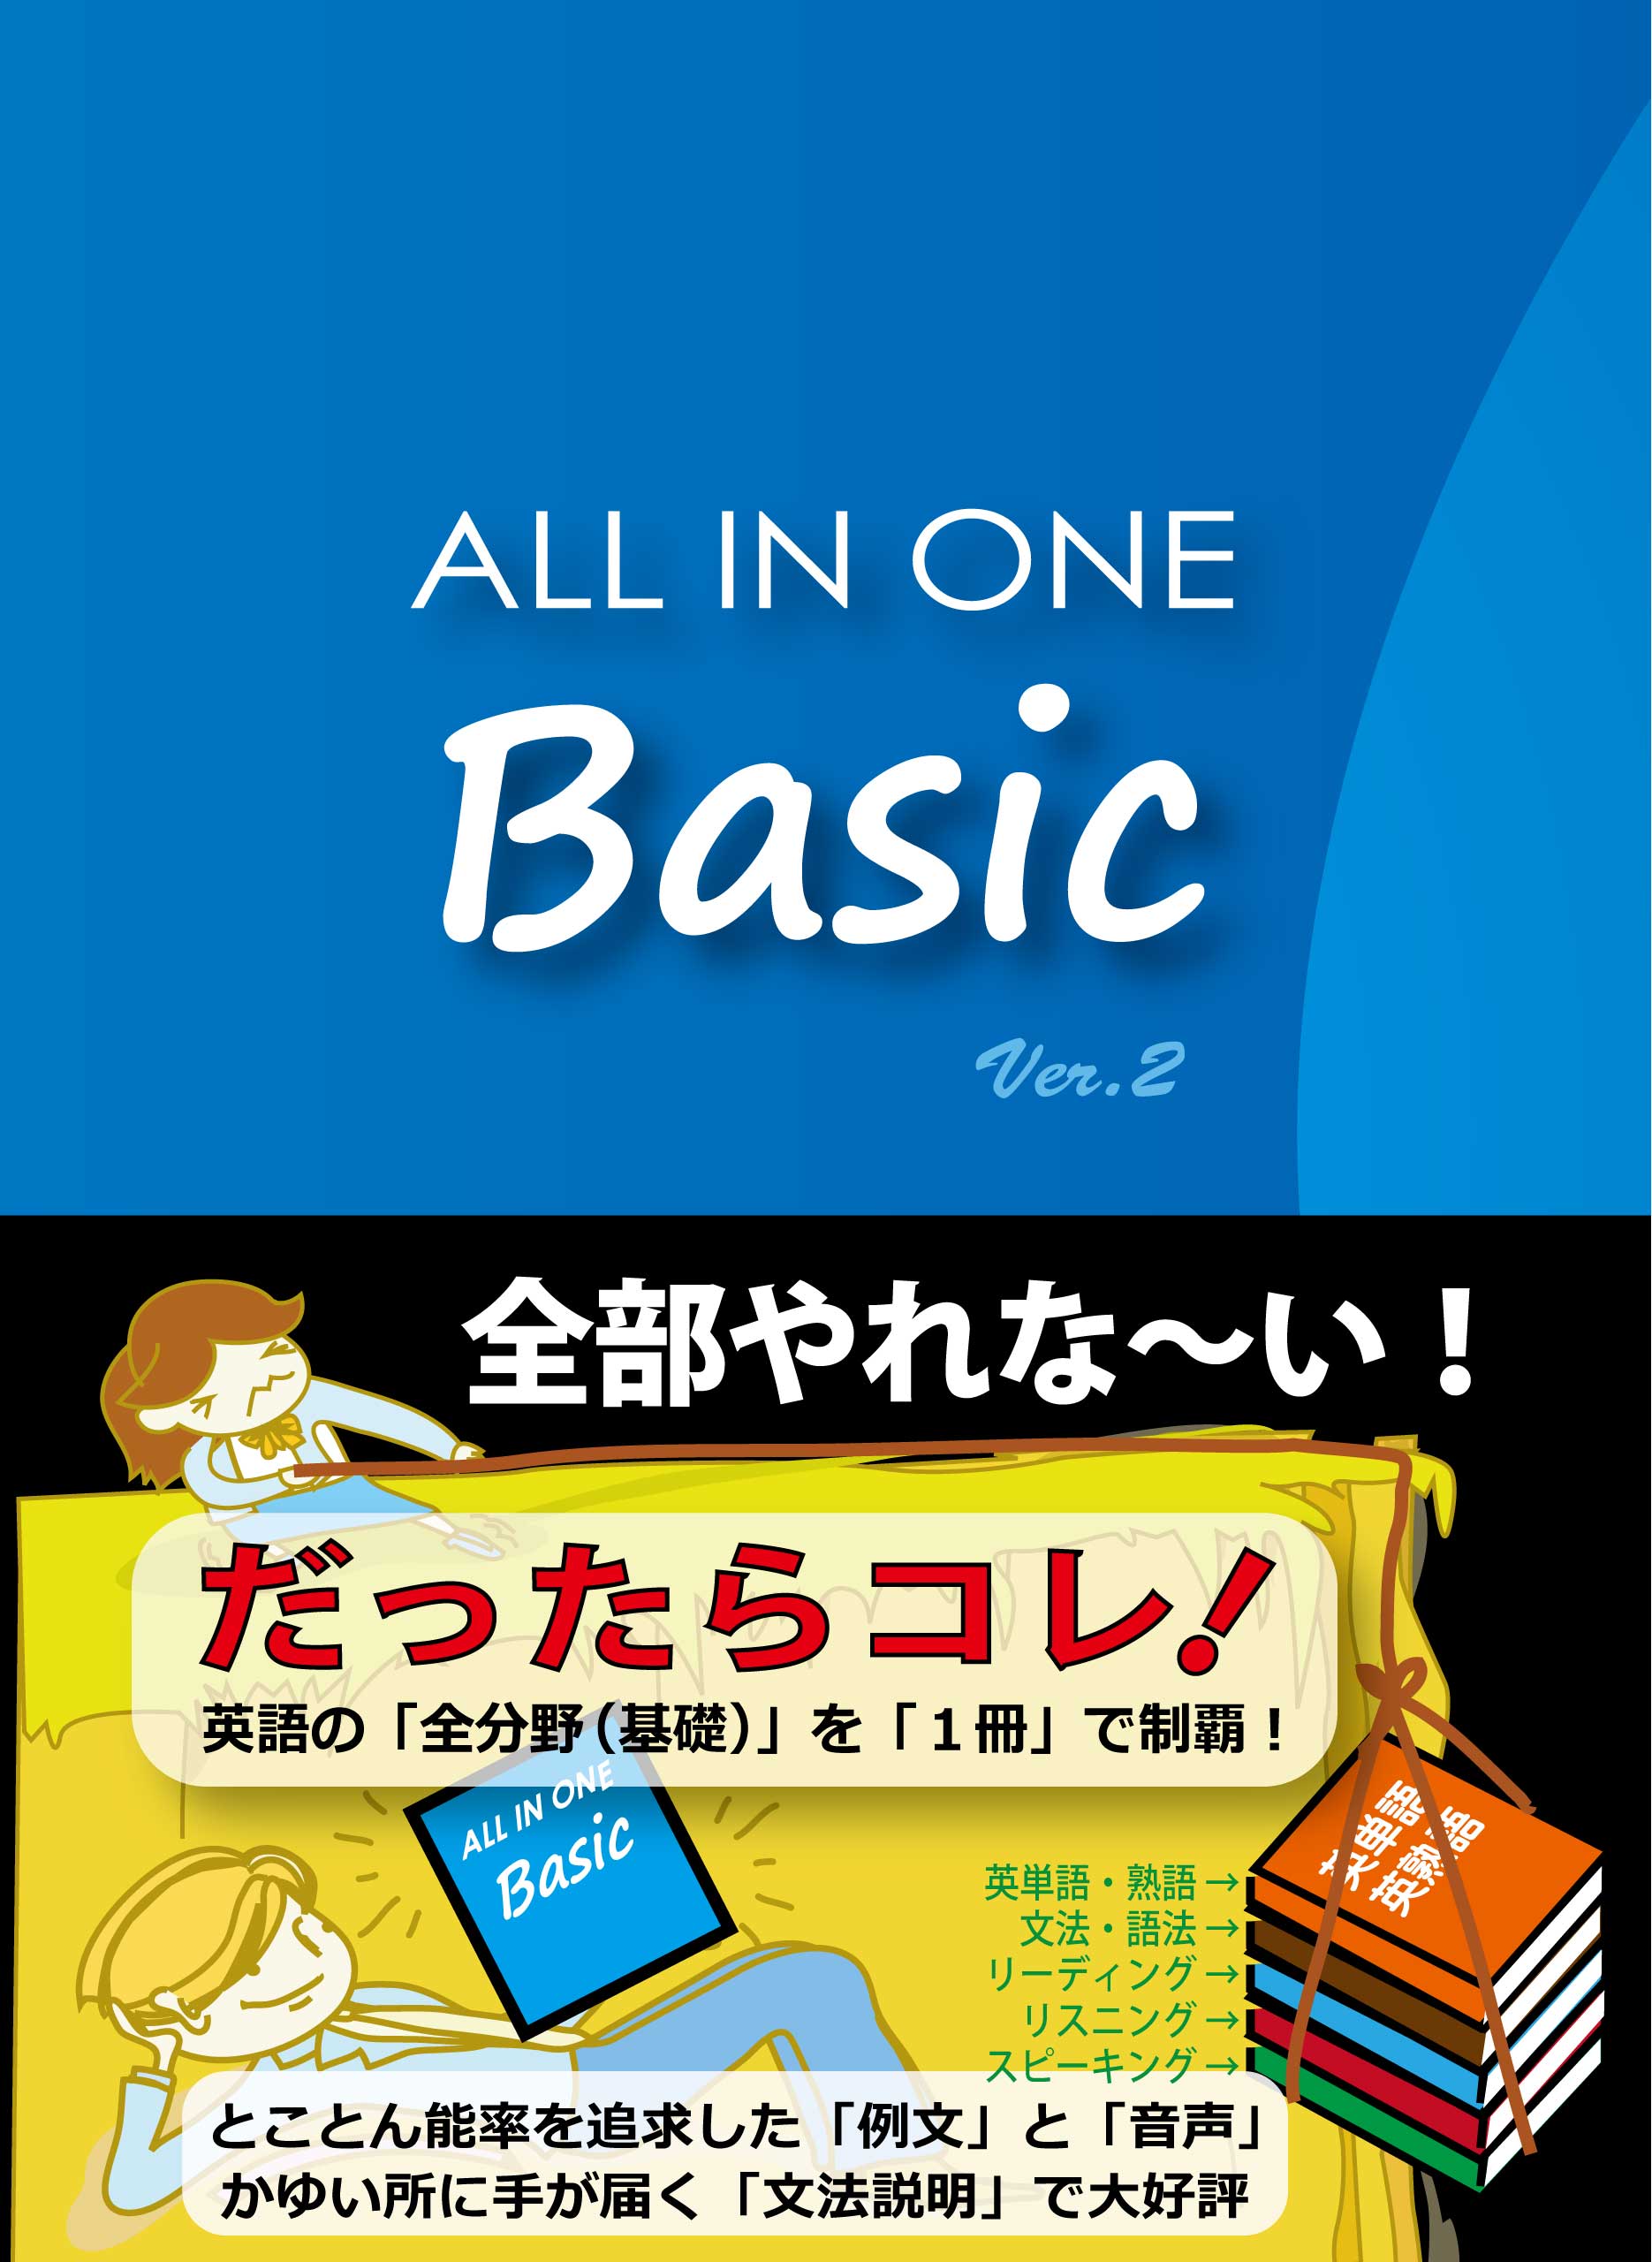 All in One Basic　Ver.2の商品画像